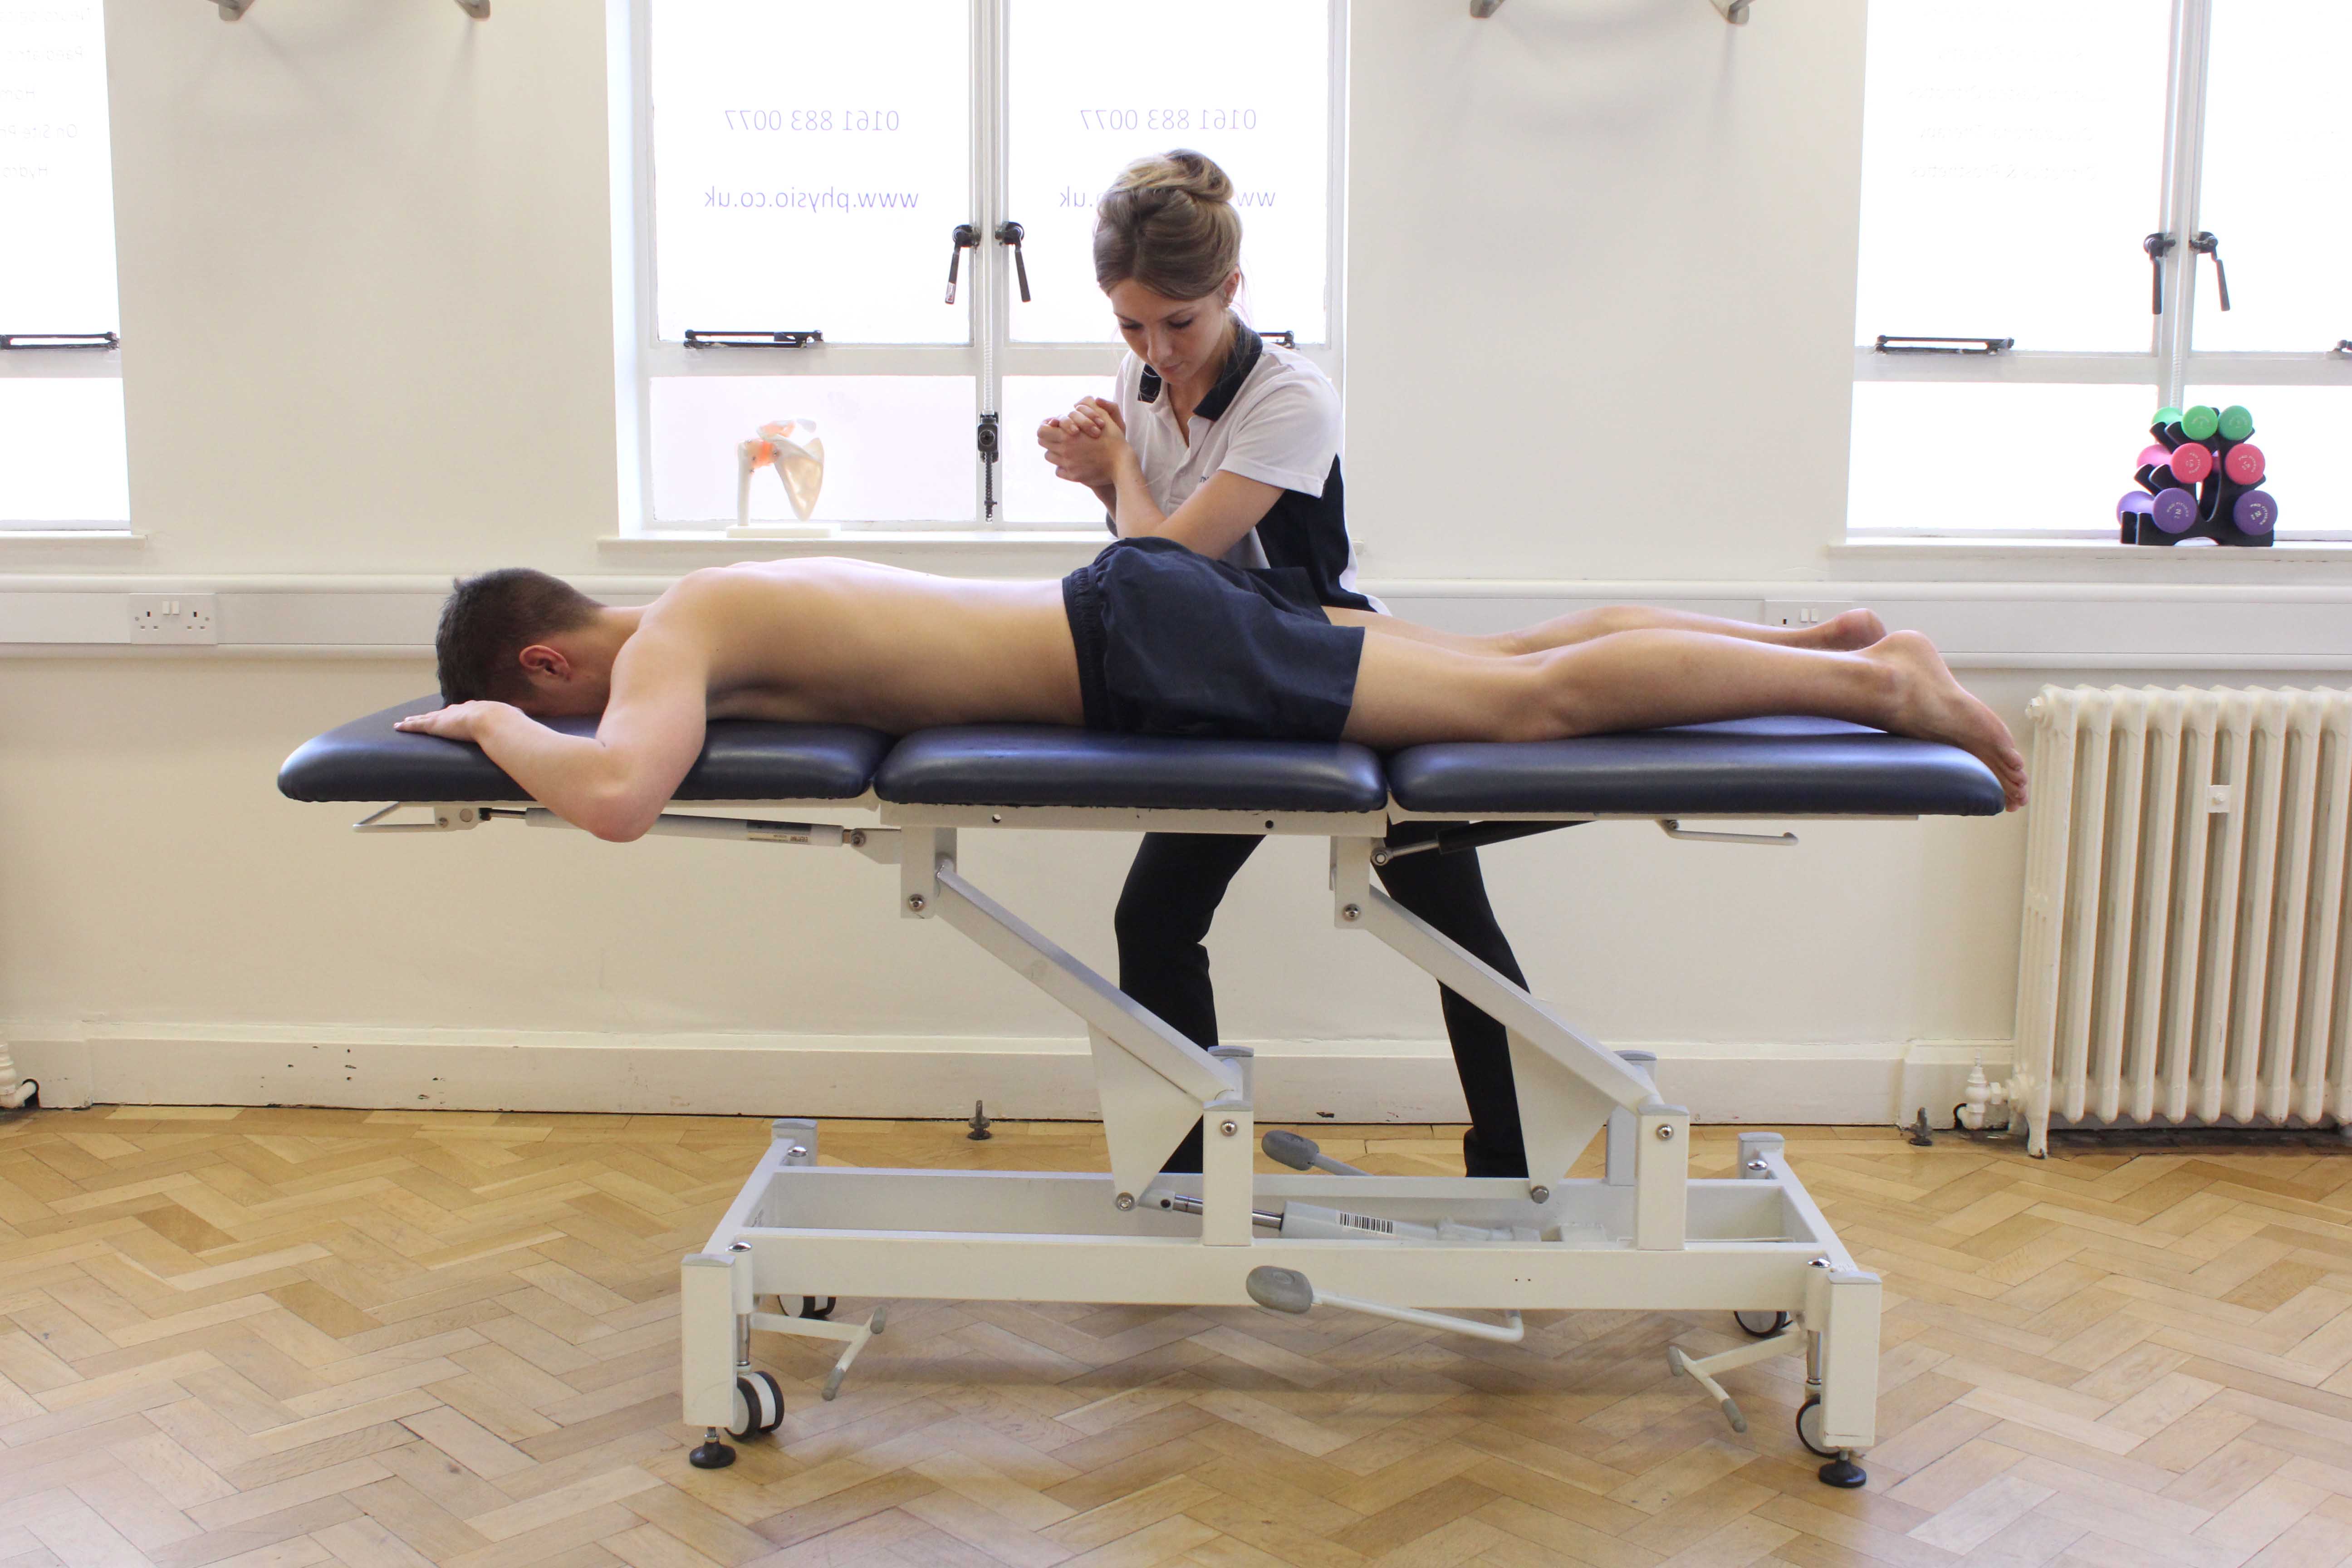 Trigger point massage of the leg adducter muscles by experienced MSK therapist